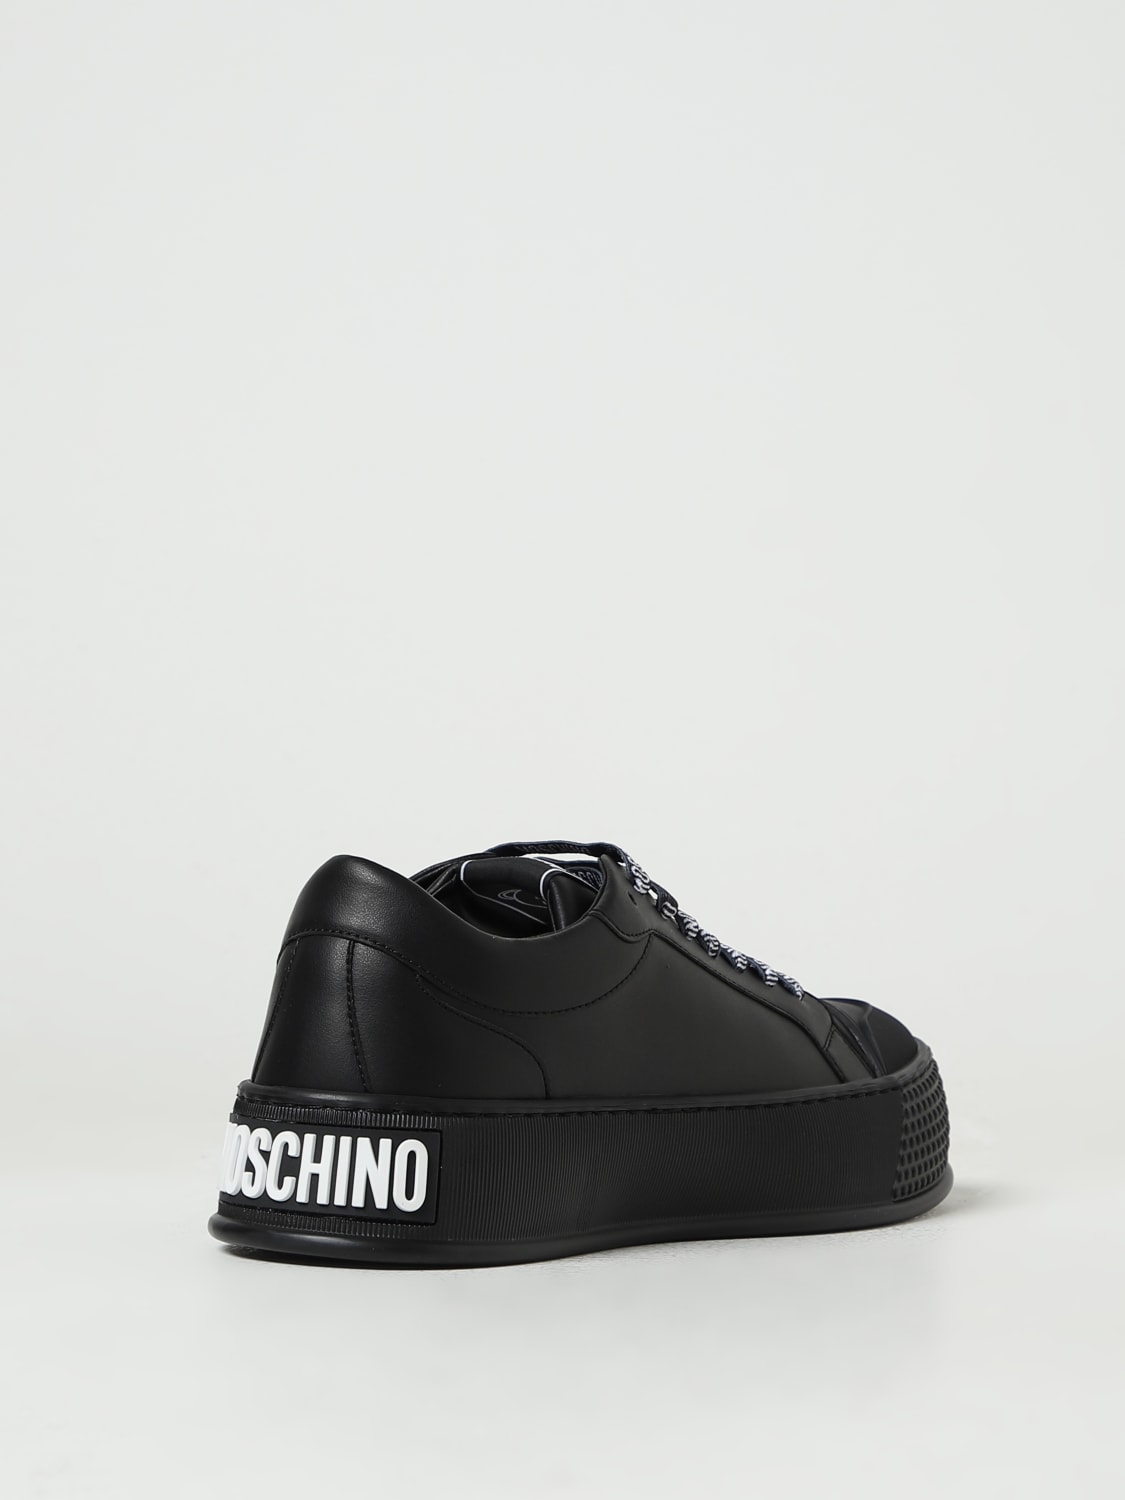 Moschino Sneakers With Logo, in Black for Men